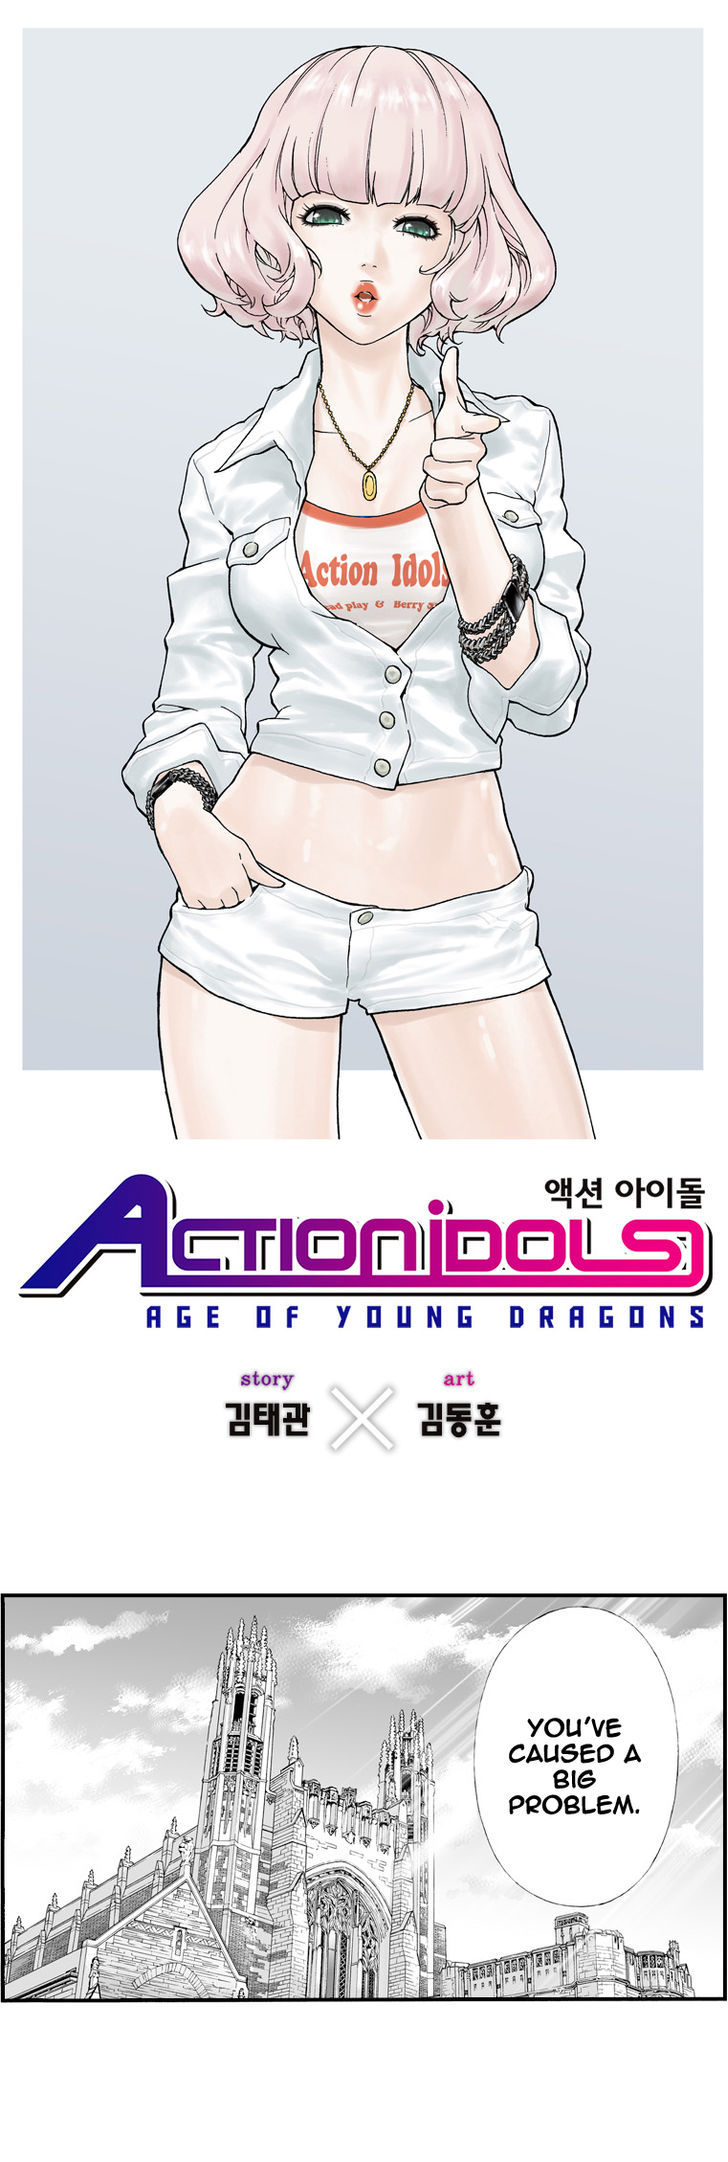 Action Idols - Age of Young Dragons 5